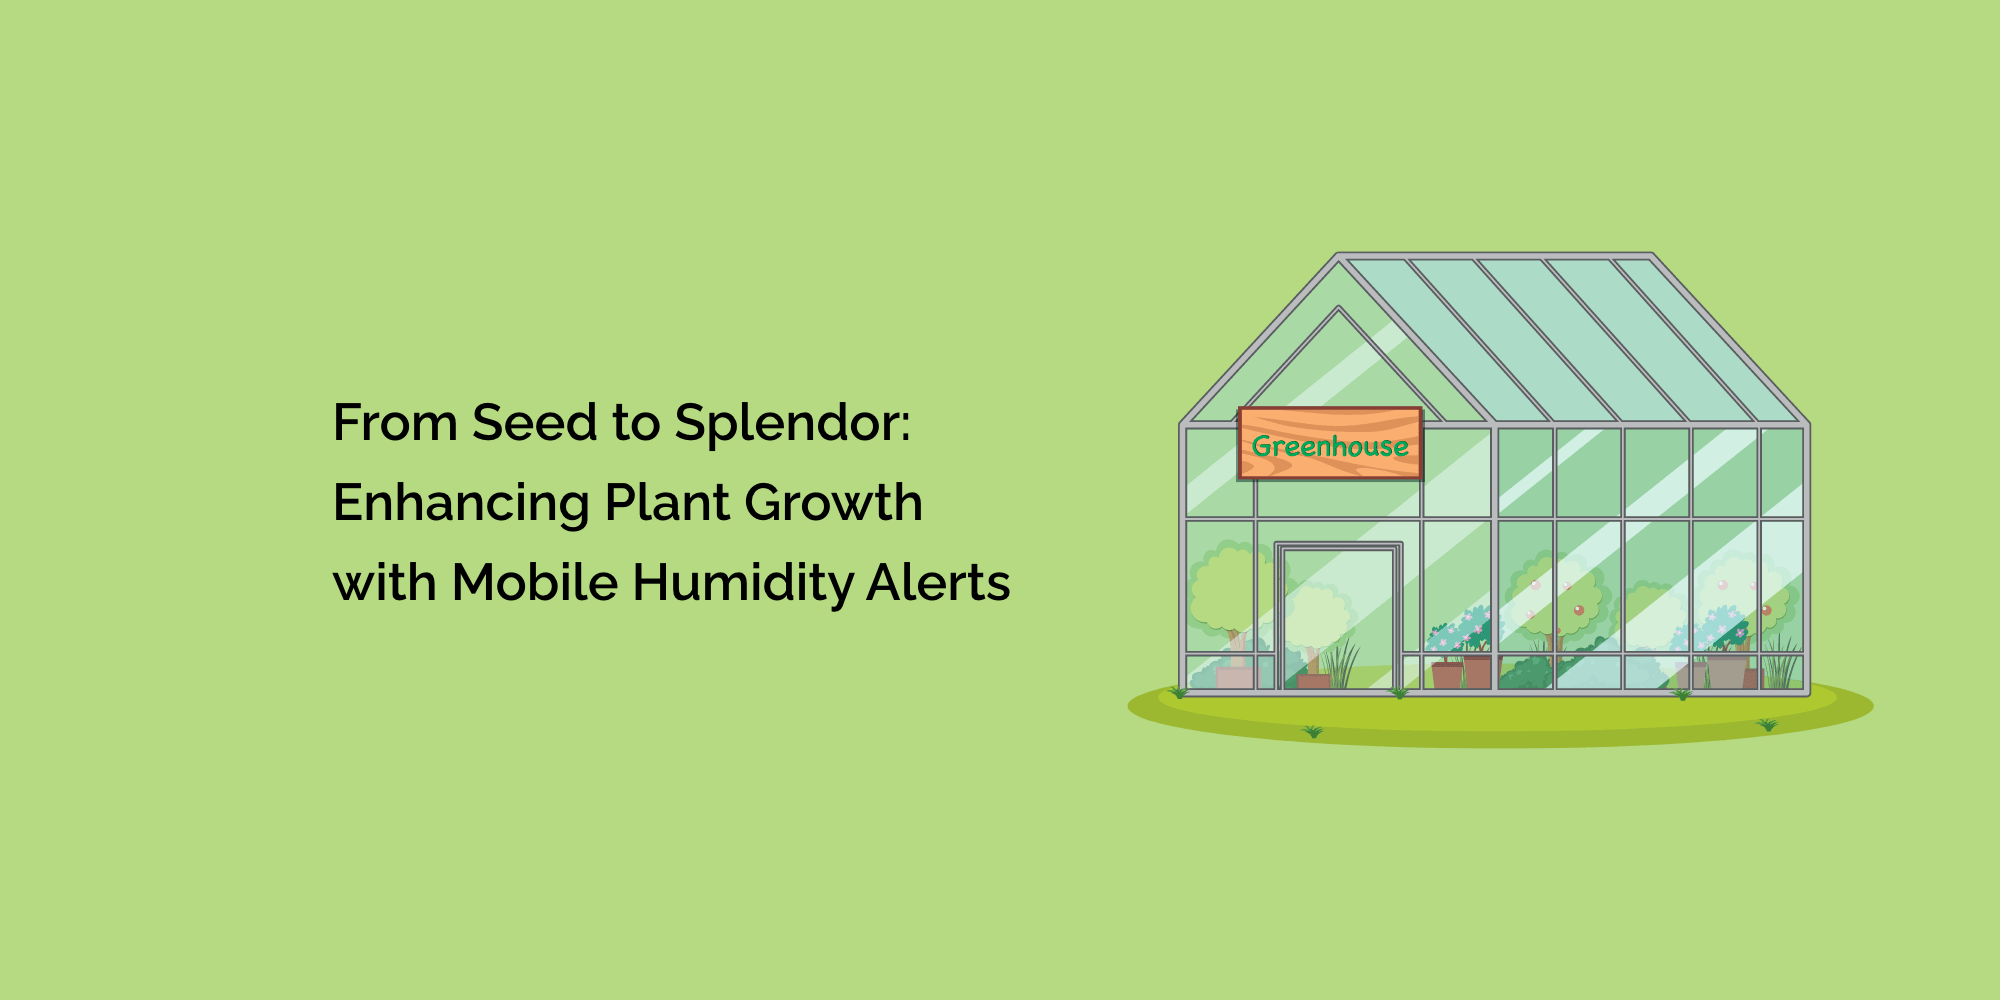 From Seed to Splendor: Enhancing Plant Growth with Mobile Humidity Alerts